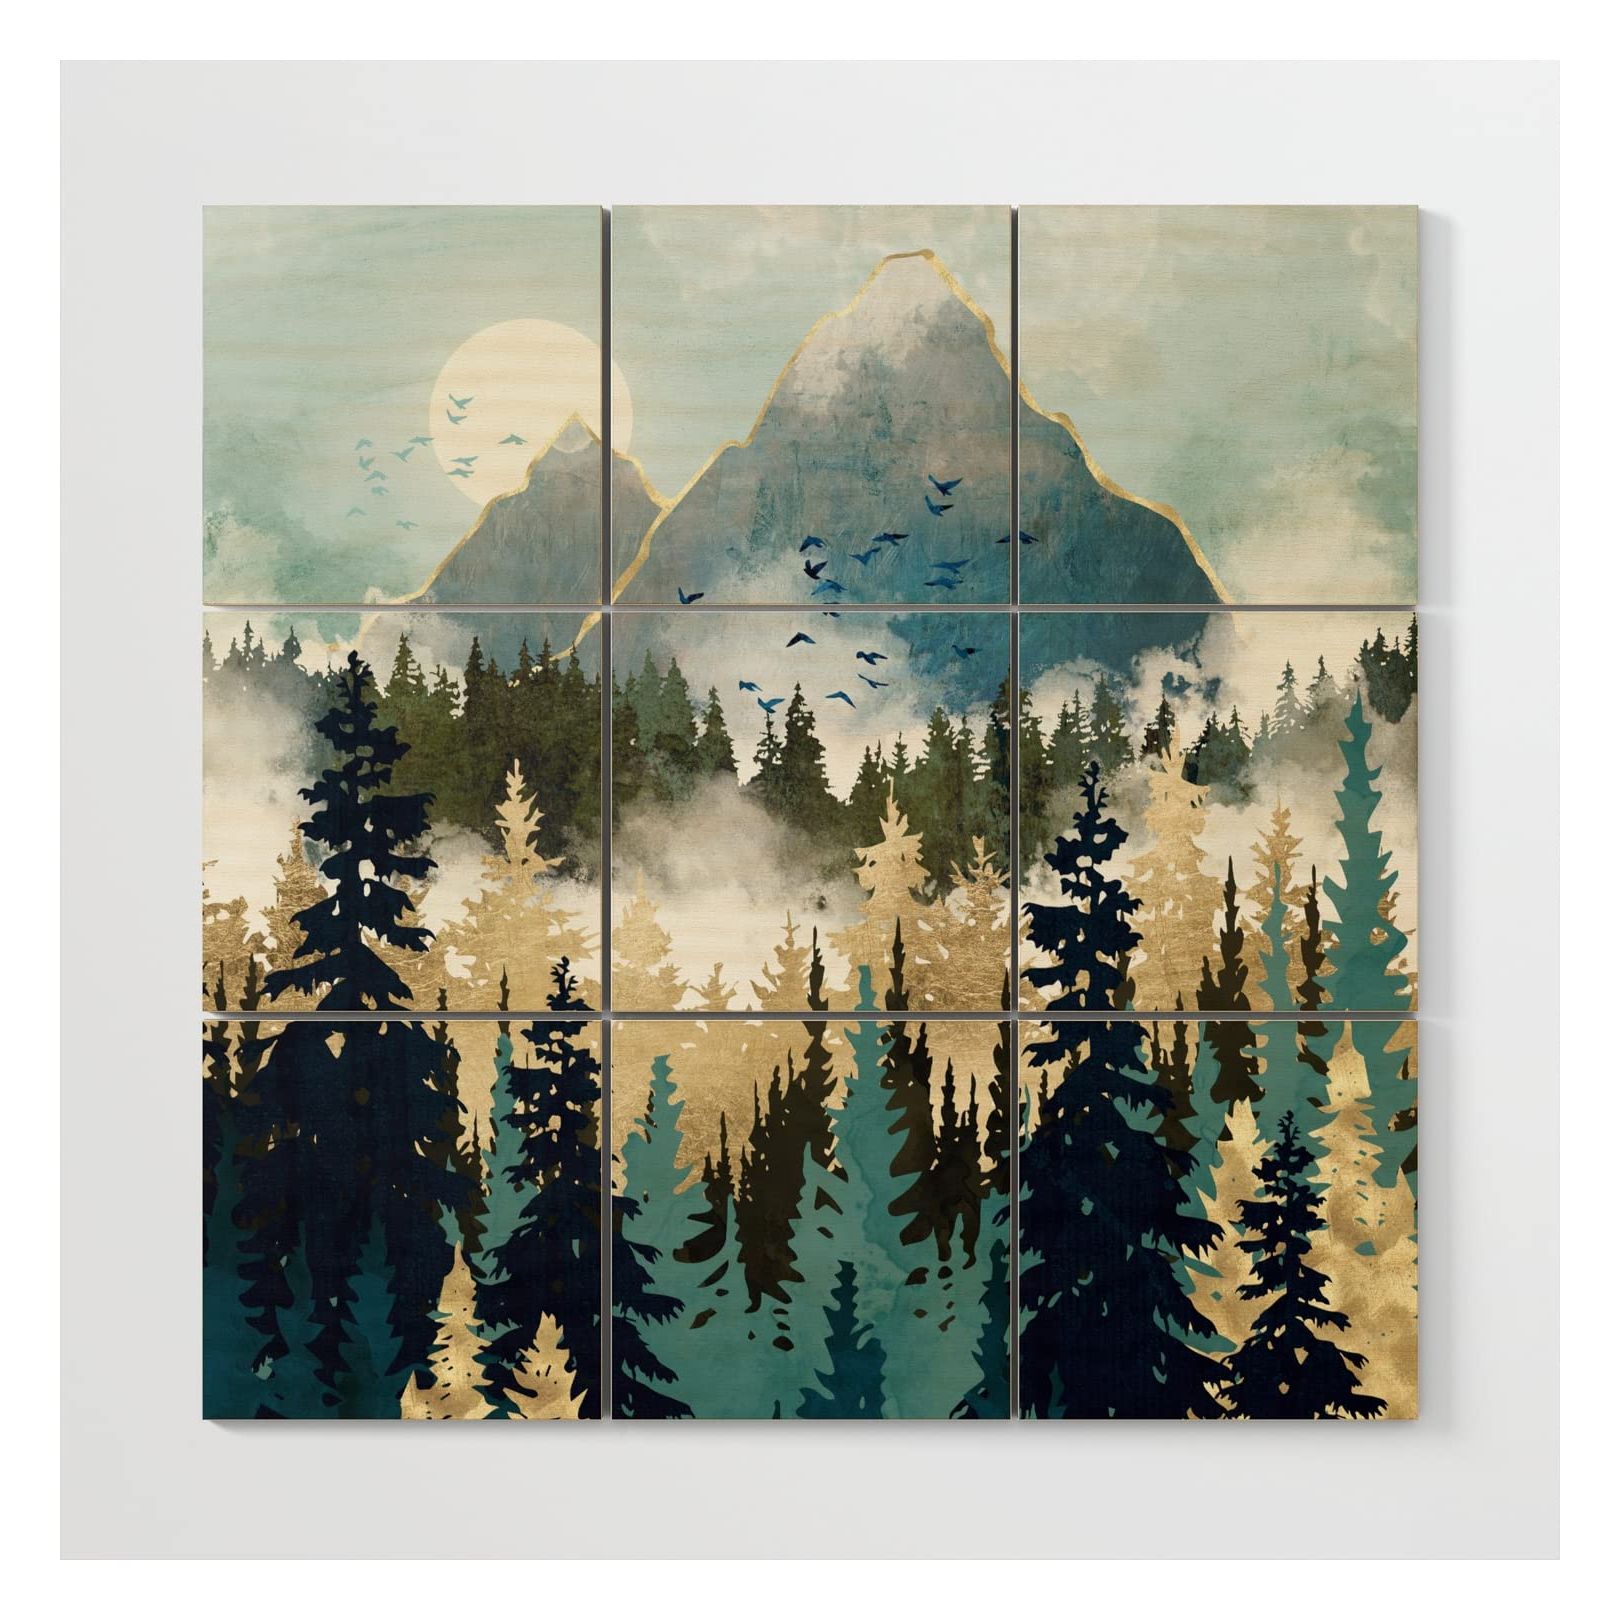 Amazon: Society6 Misty Pinesspacefrogdesigns Wooden Wall Art – 5' X  5' : Home & Kitchen With 2018 Misty Pines Wall Art (View 5 of 15)